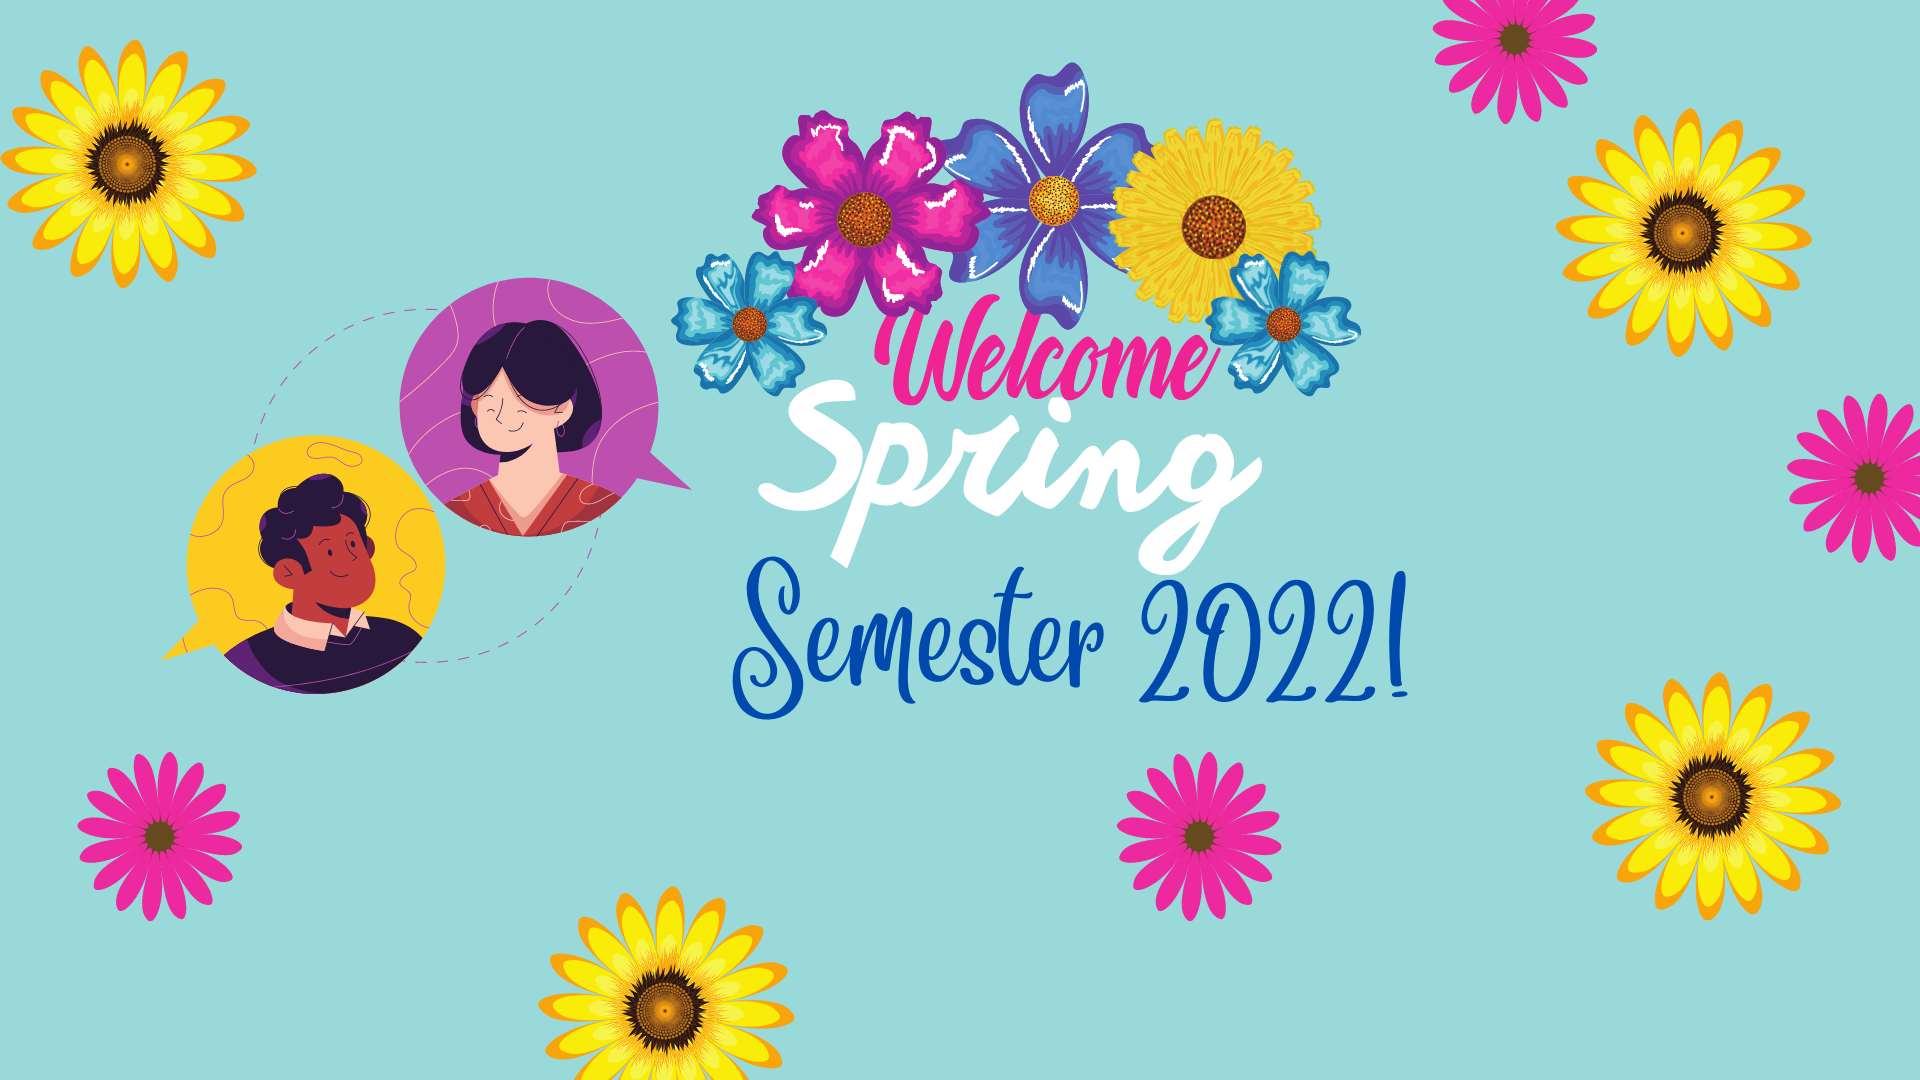 Welcome Spring Semester 2022